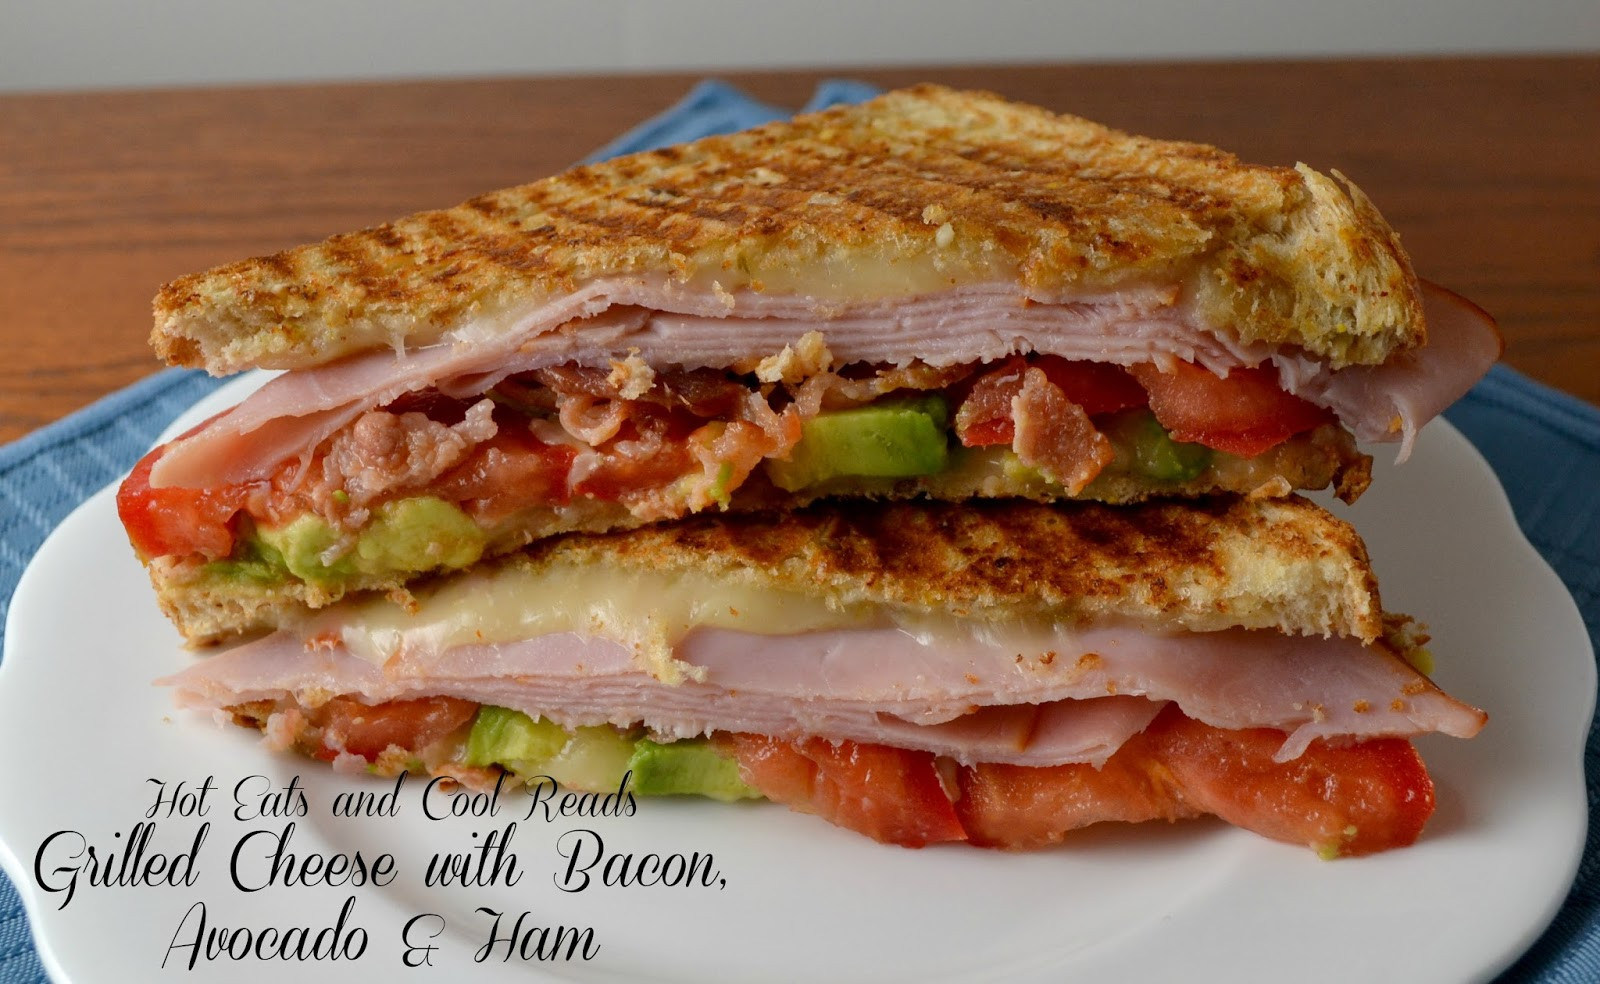 Hot Ham Sandwich Recipes
 Hot Eats and Cool Reads Grilled Cheese Sandwich with